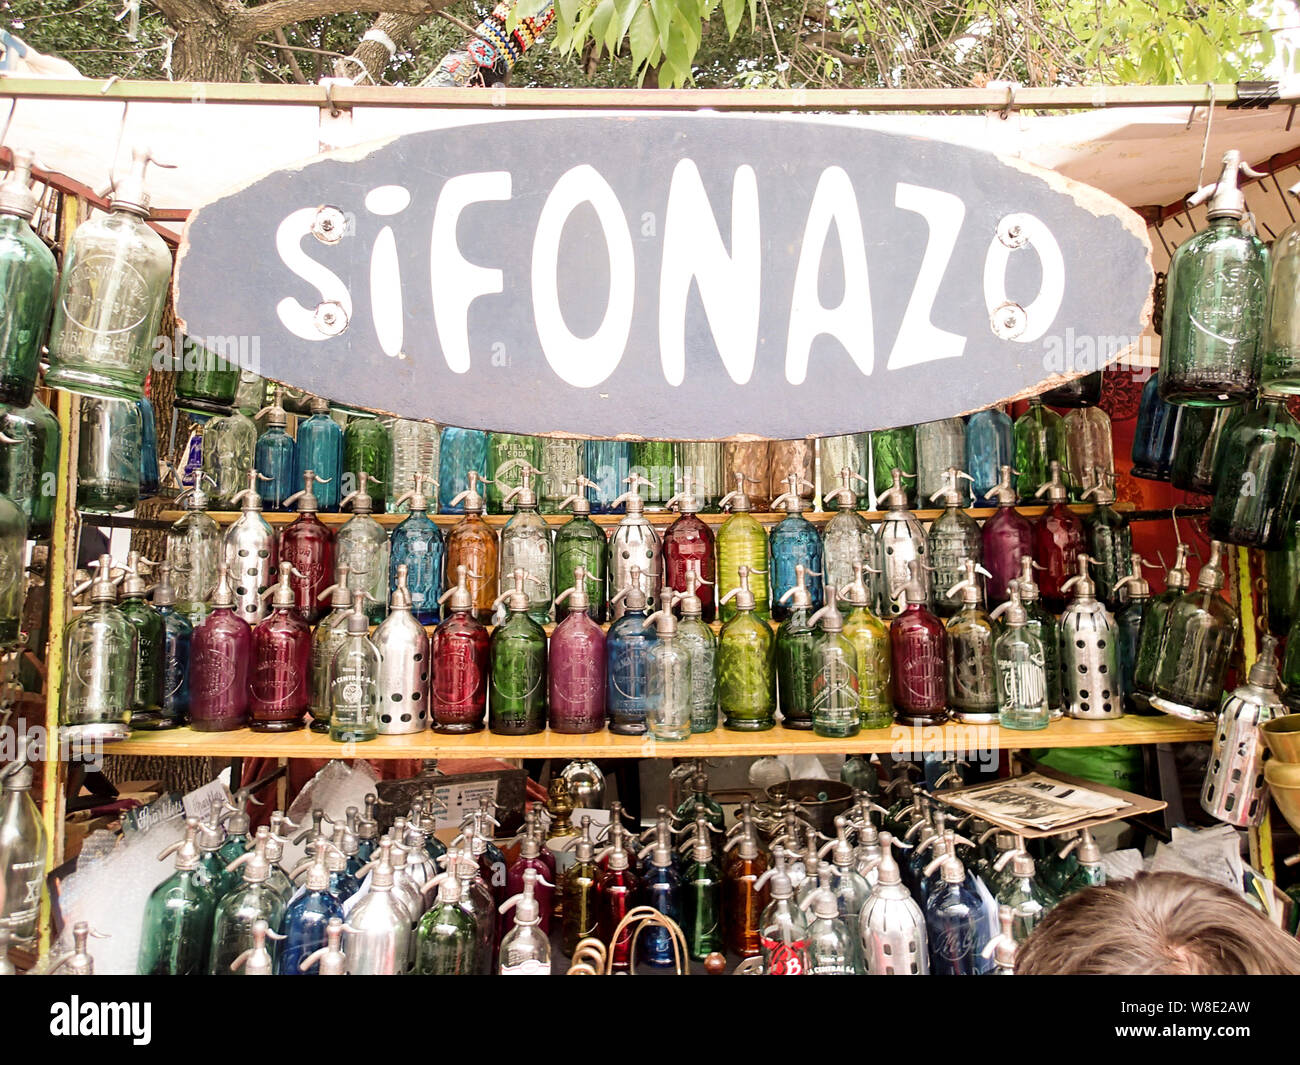 Buenos Aires, Argentina- March 4, 2013: colorful siphon water bottles in a row at a market stall in San Telmo Market in Buenos Aires Stock Photo